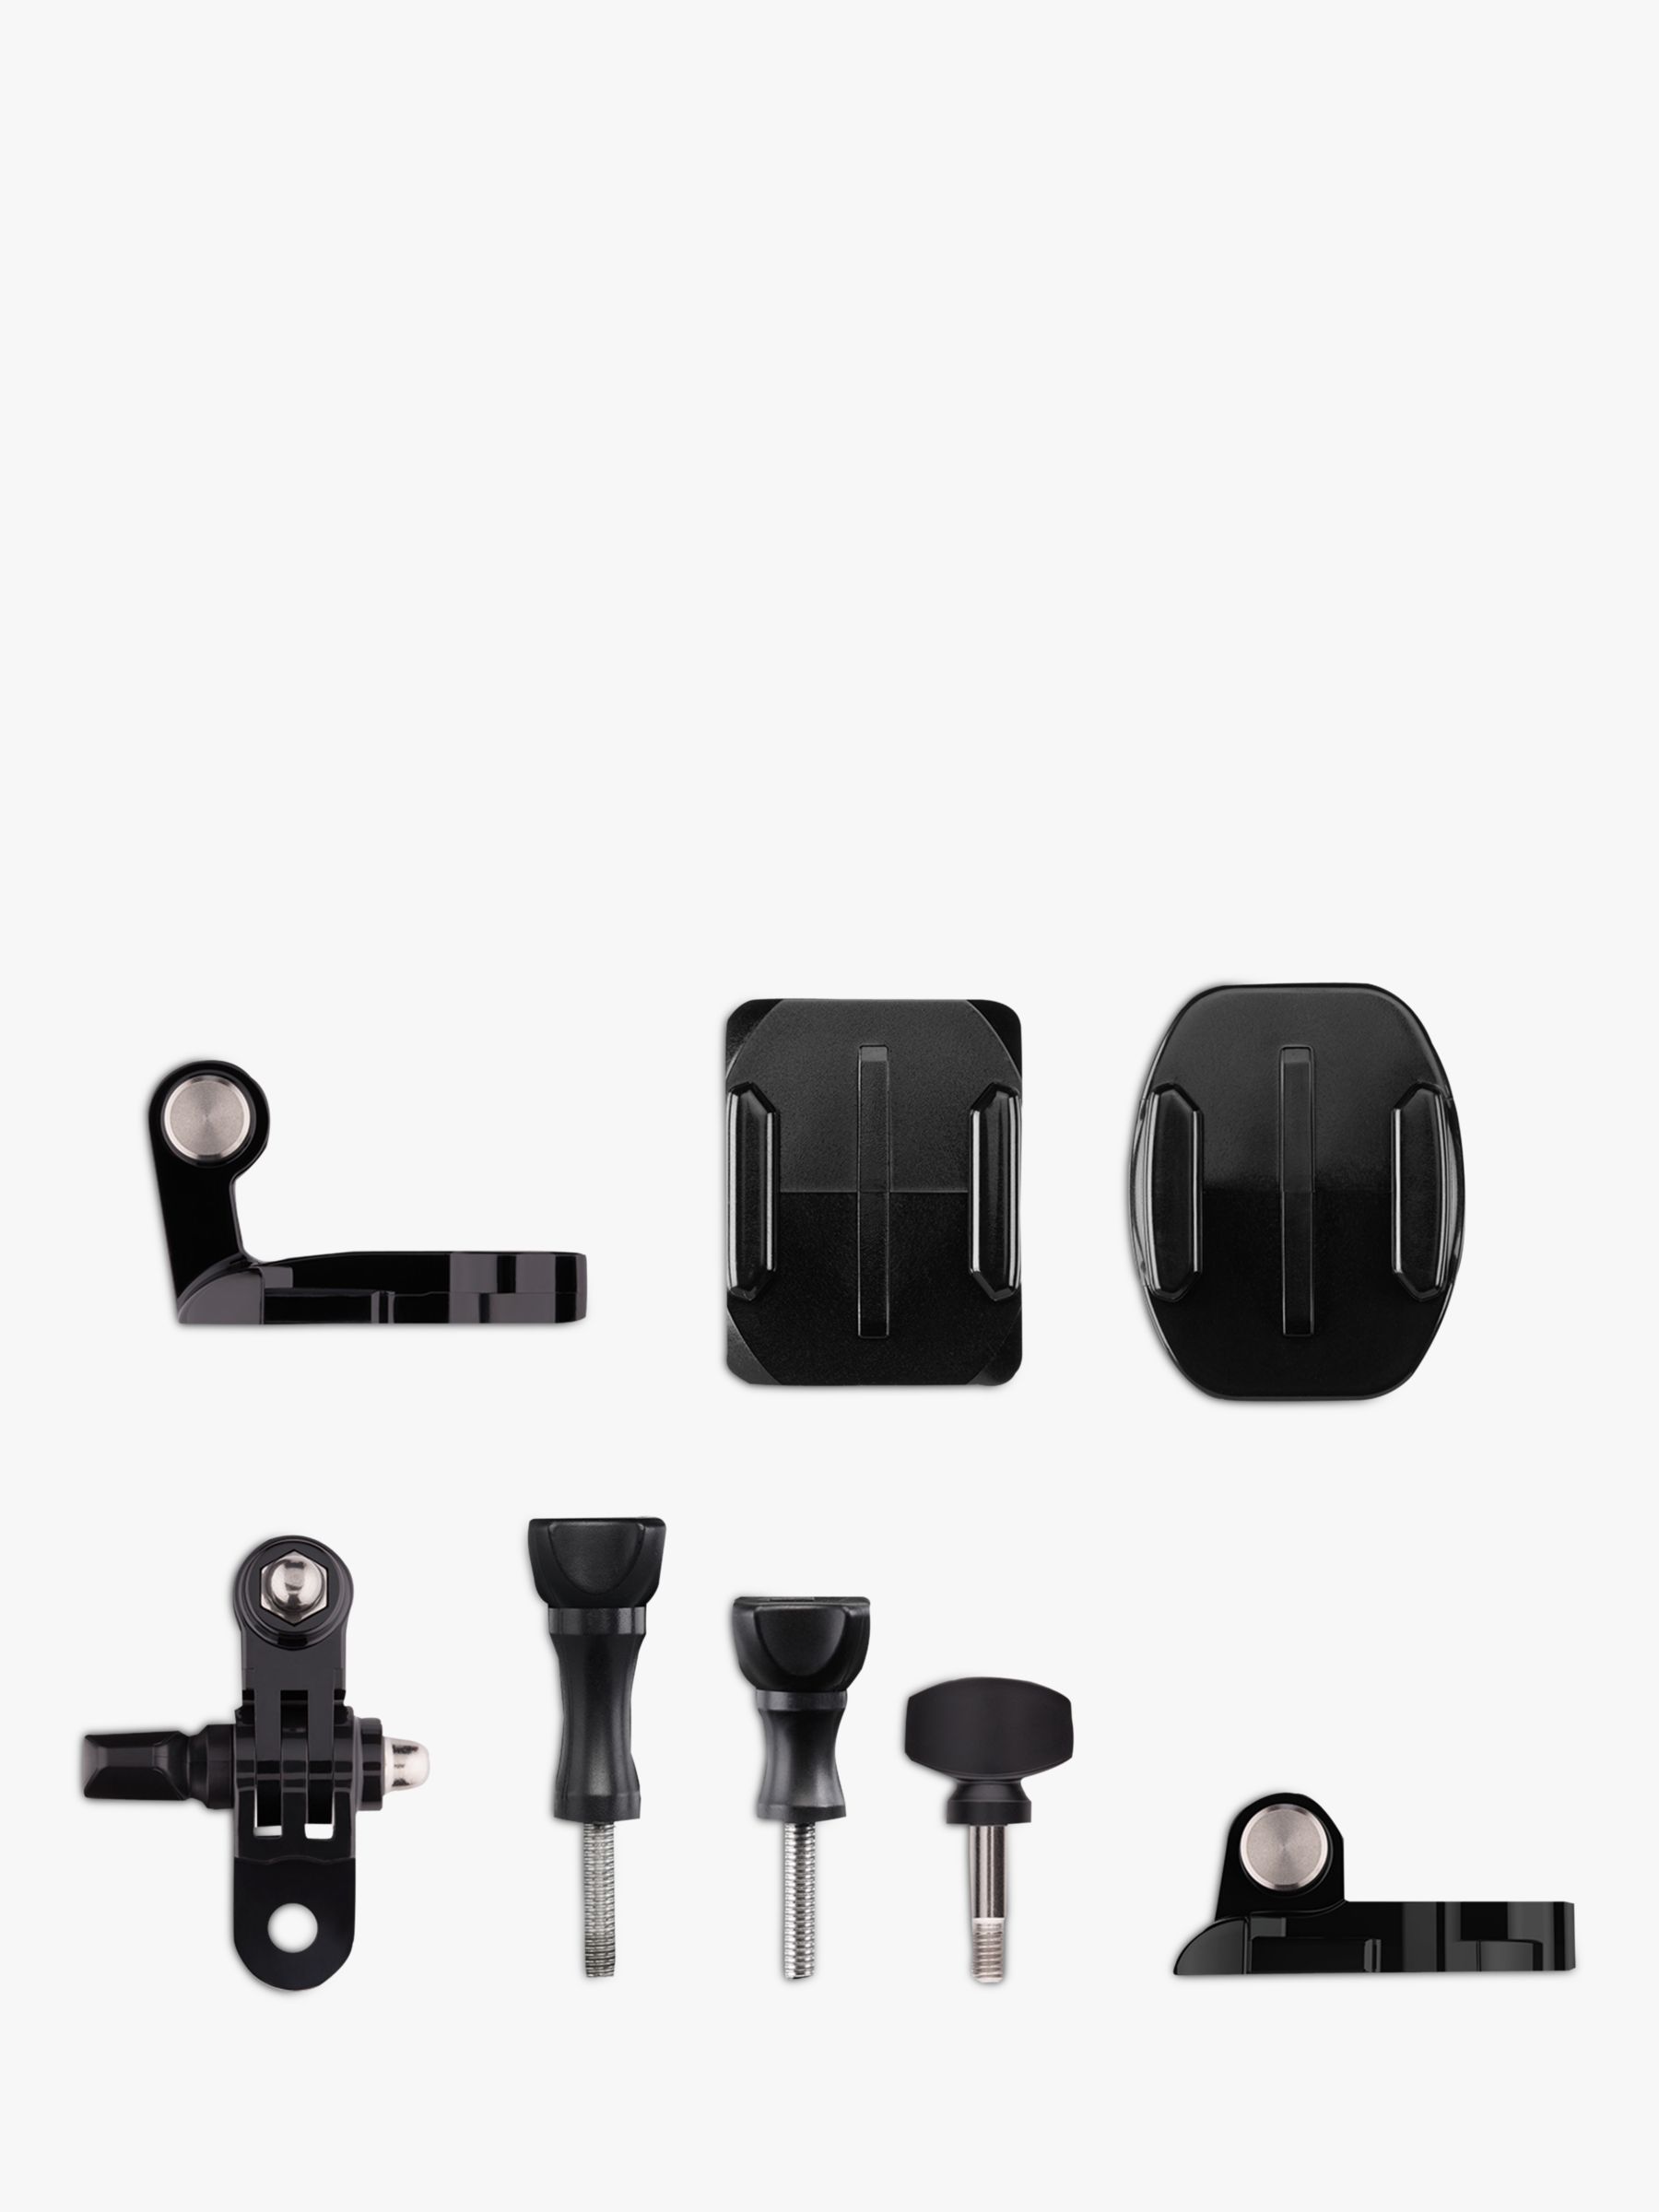 Gopro GoPro Accessories and Spare Parts Grab Bag for All GoPros